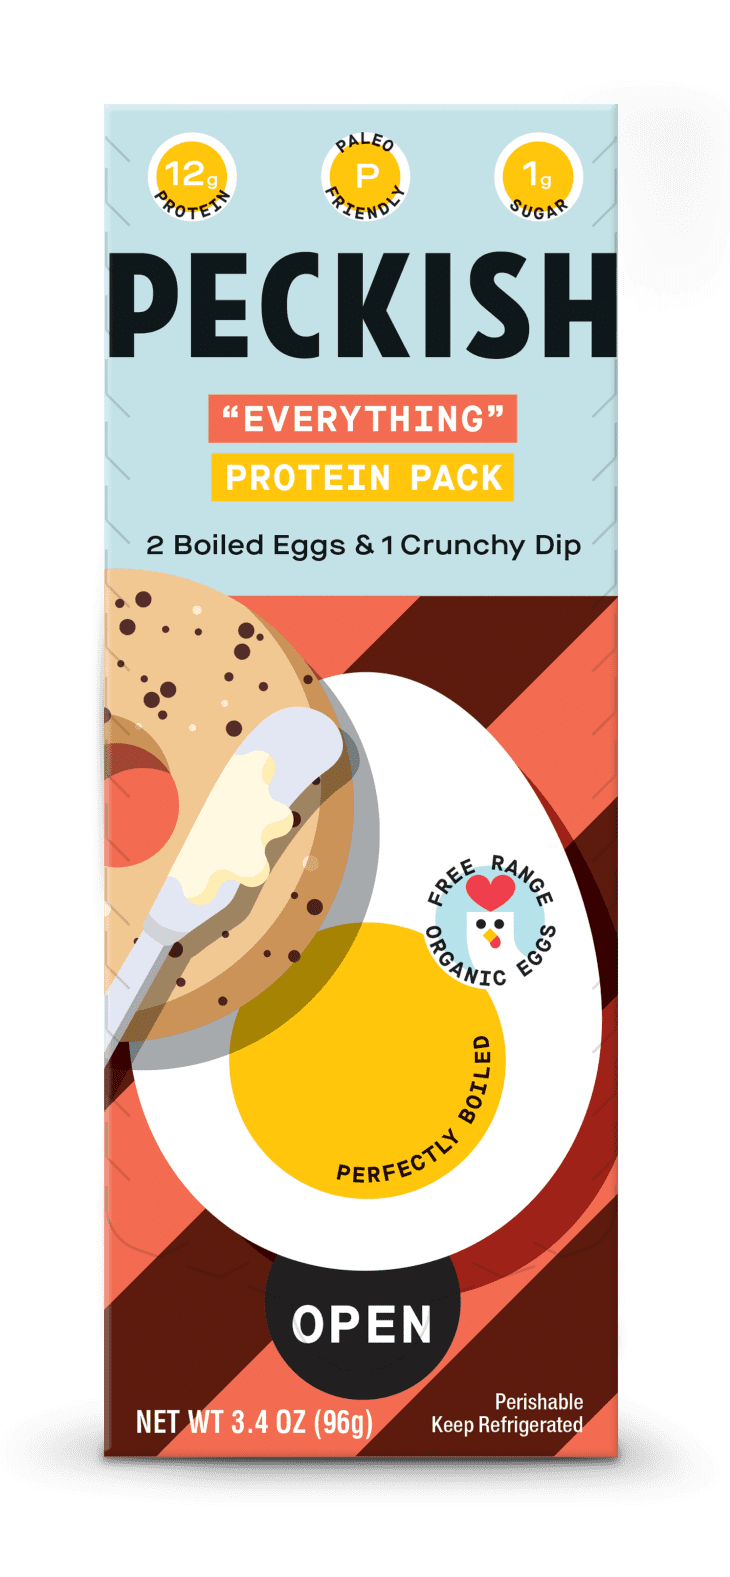 Peckish "Everything" protein pack